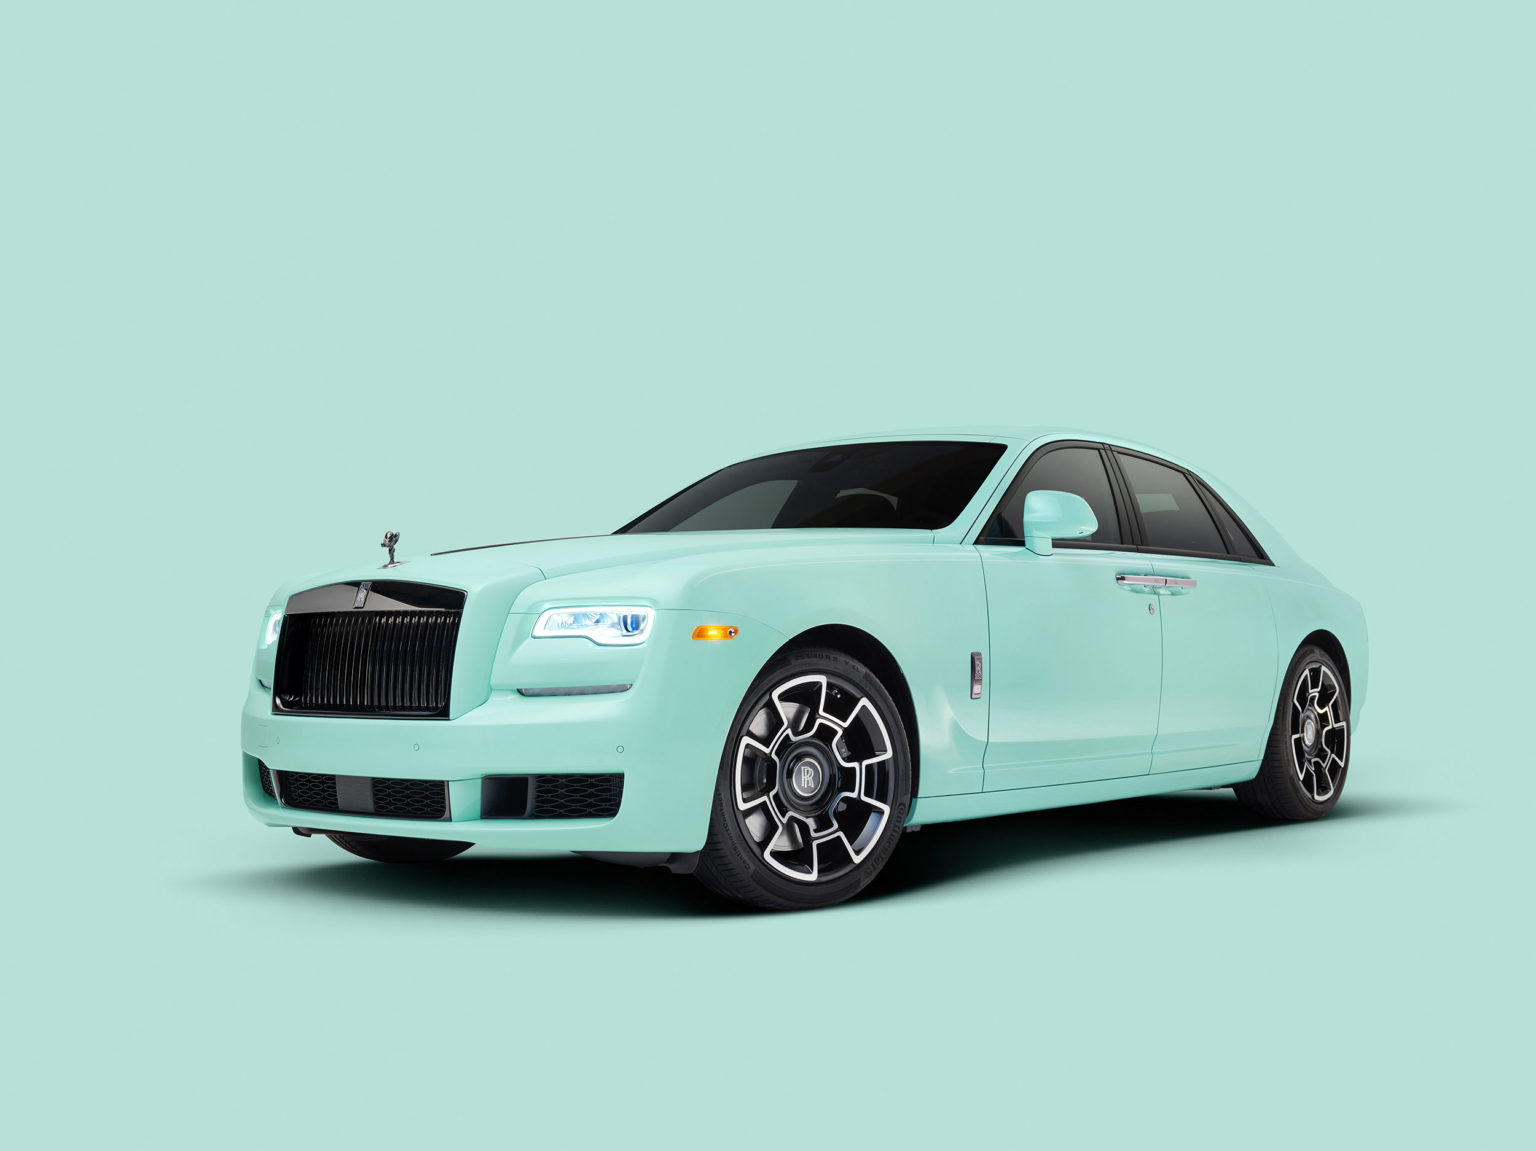 Rolls-Royce has crafted numerous vehicles over the last few years that push the envelope.